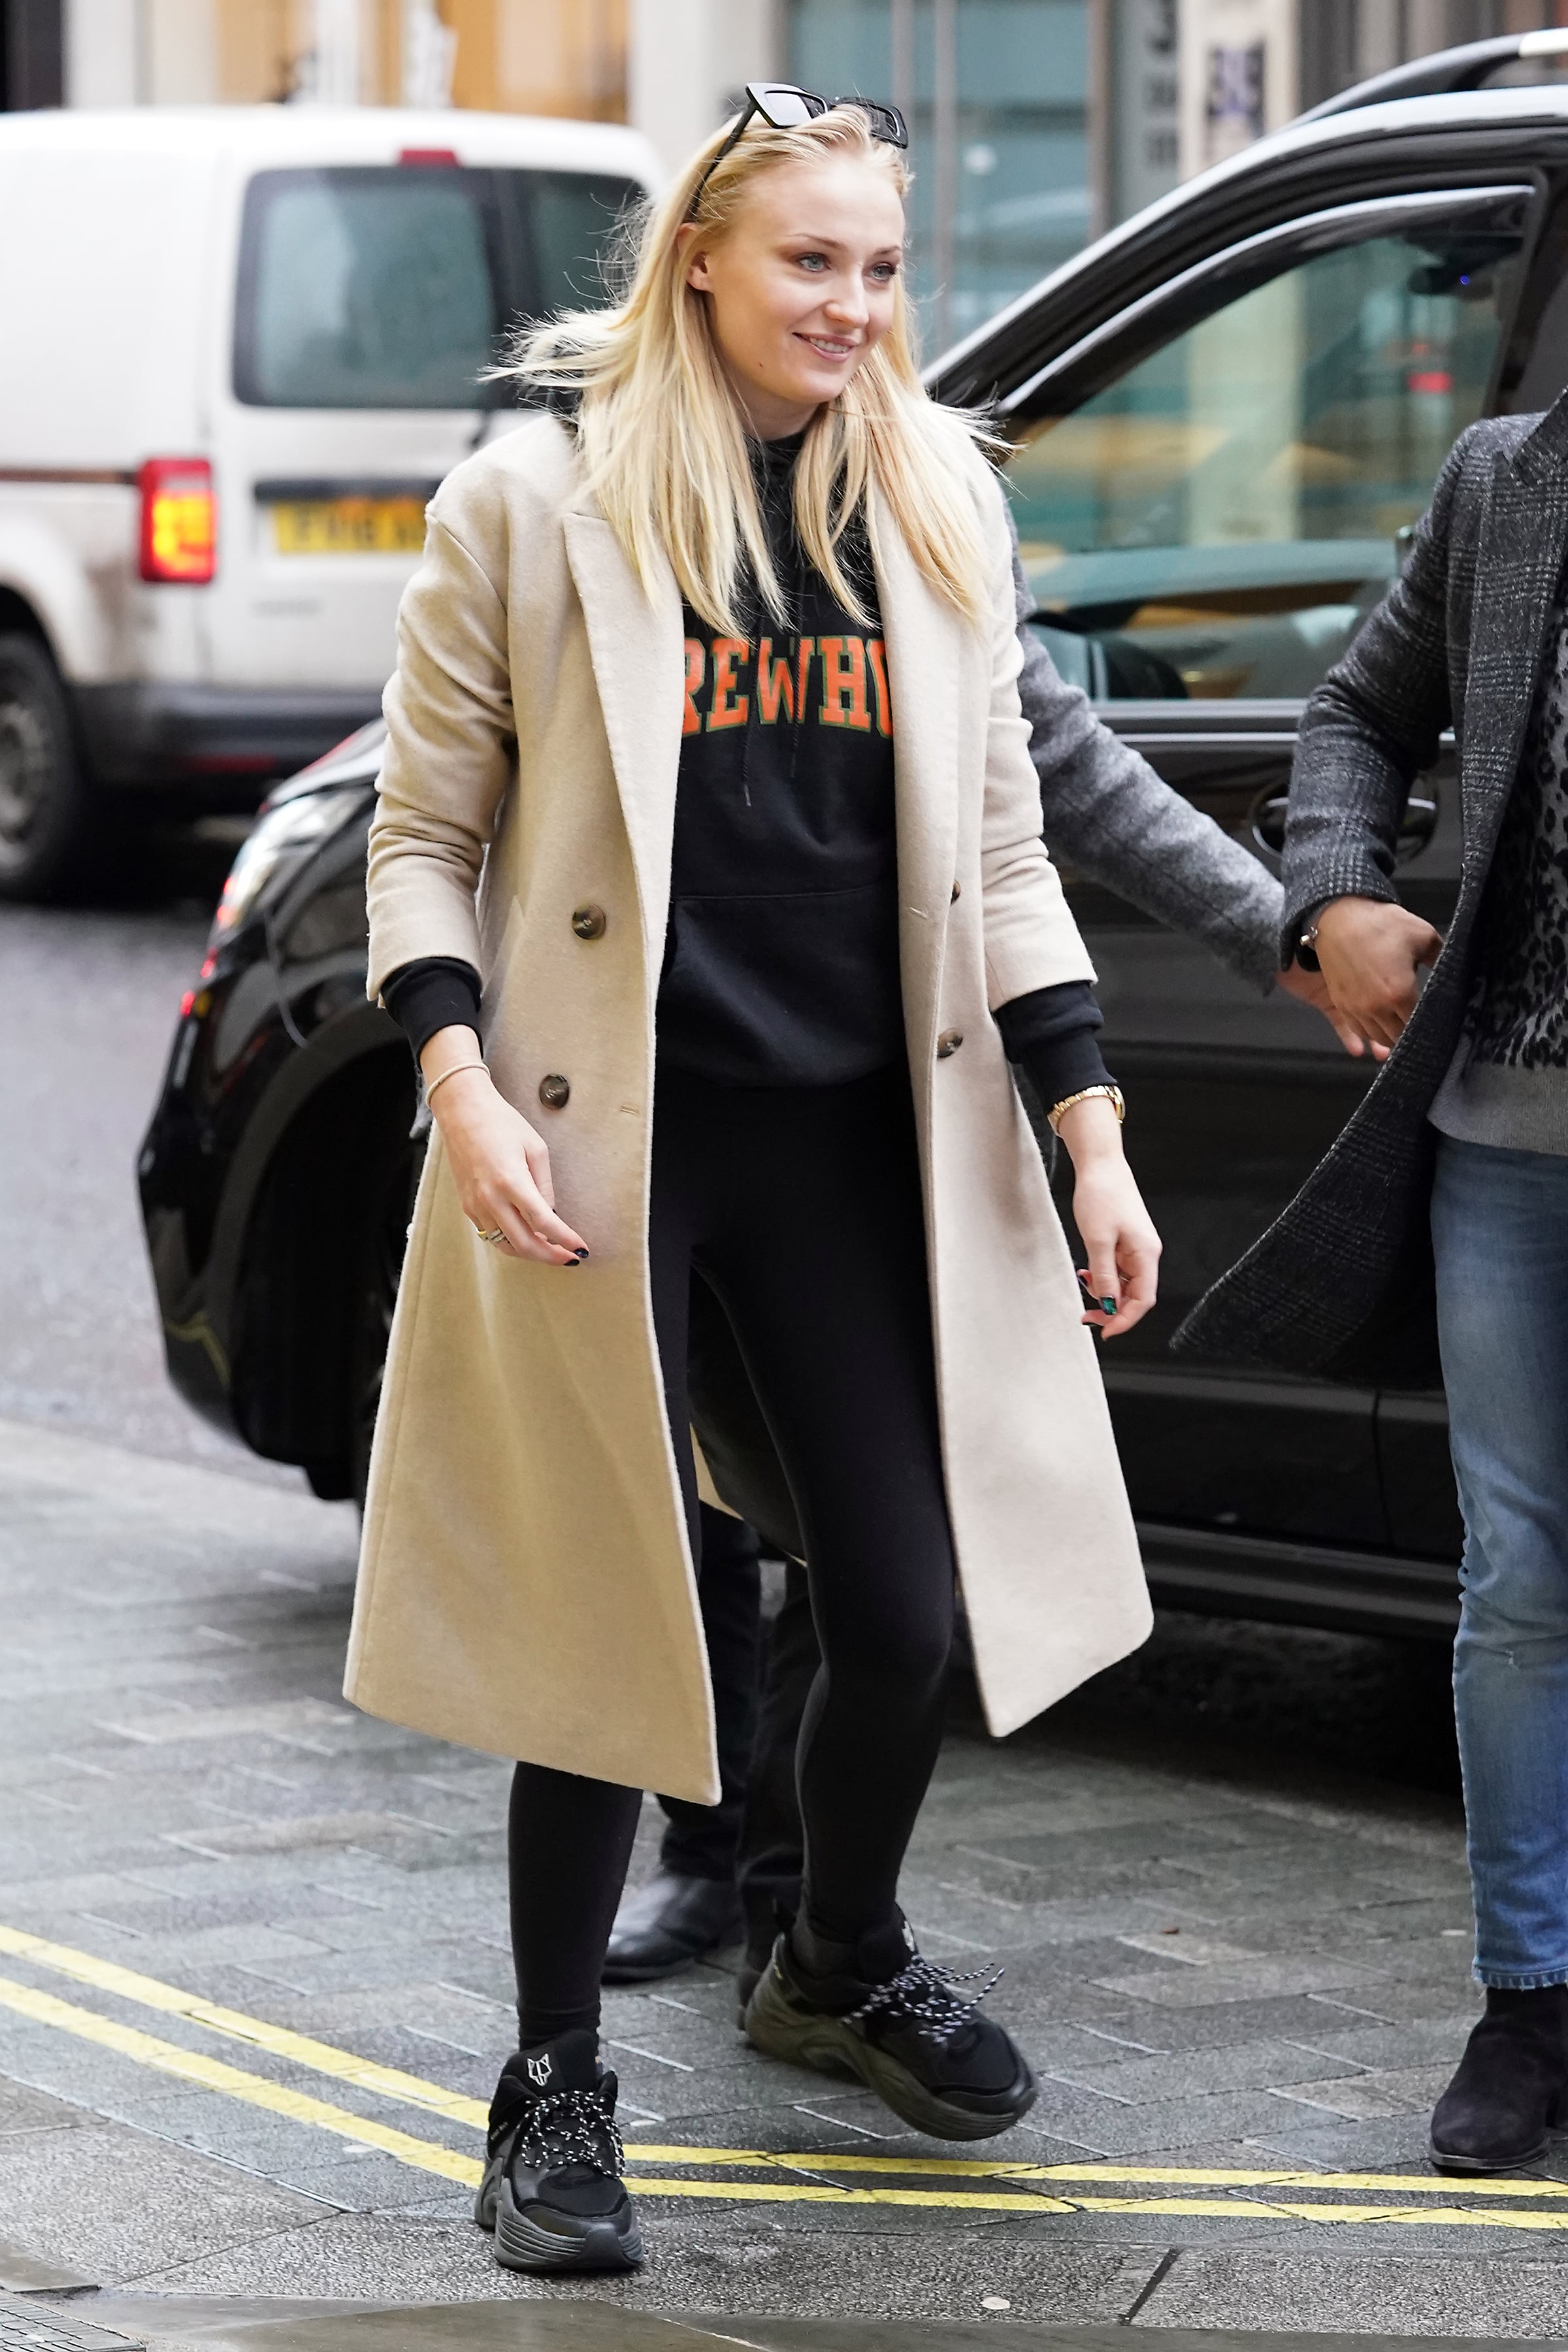 Sophie Turner's Best Street Style Outfits, Photos – Footwear News